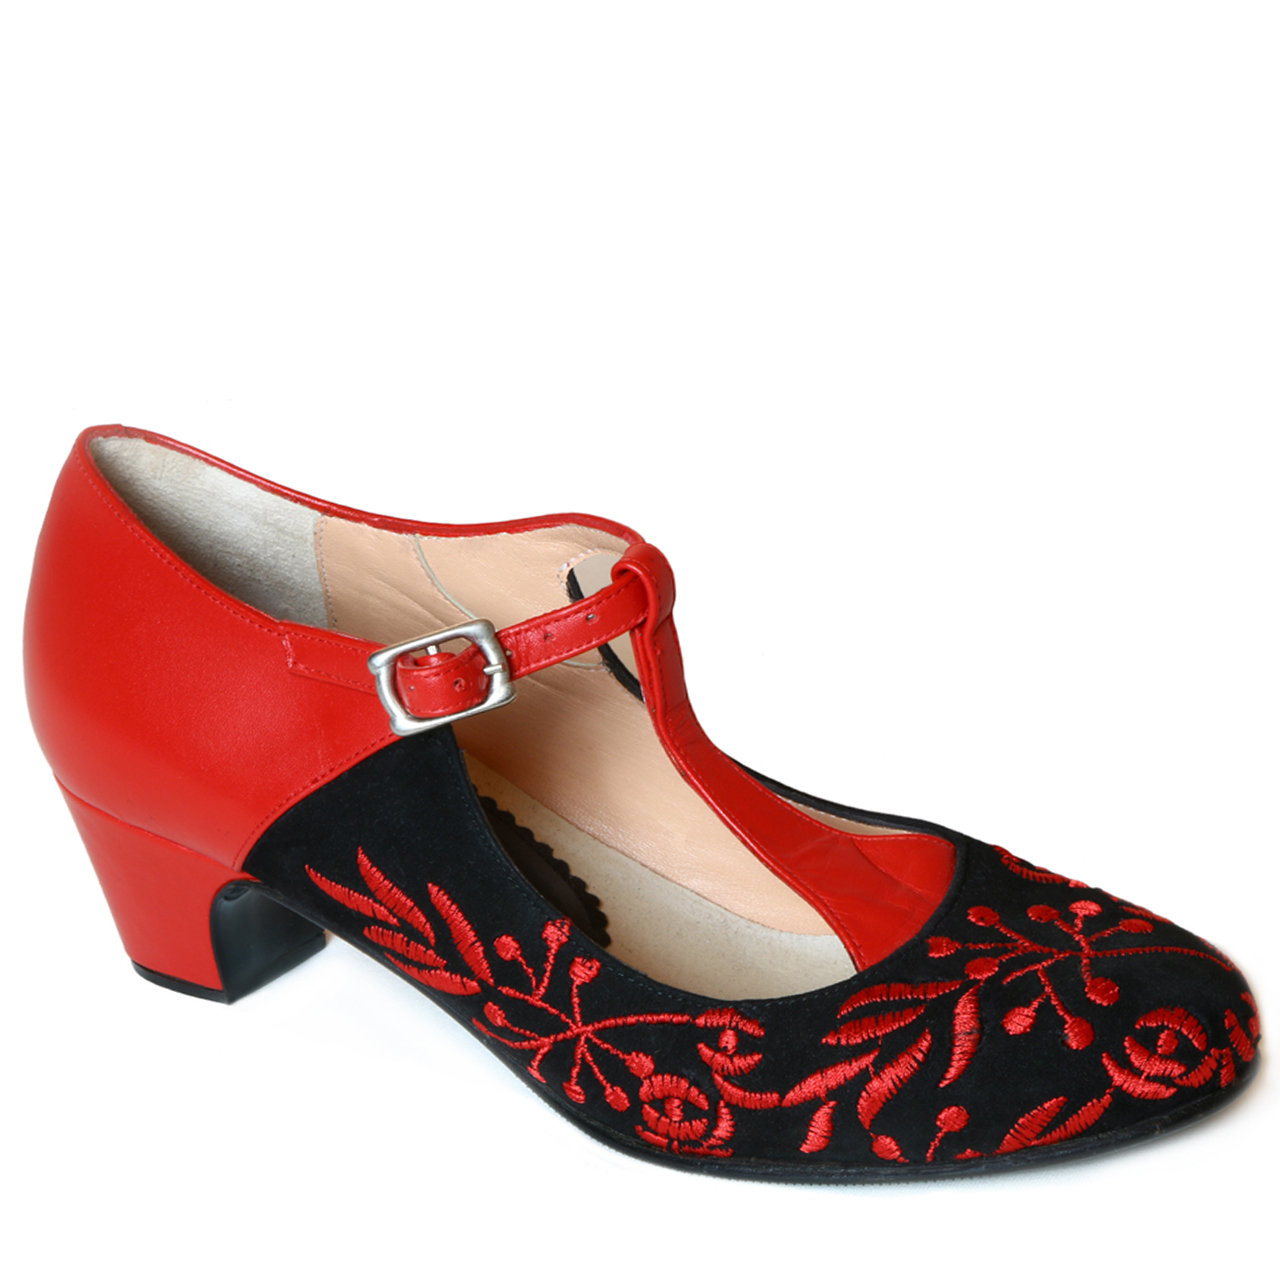 flamenco shoes with nails